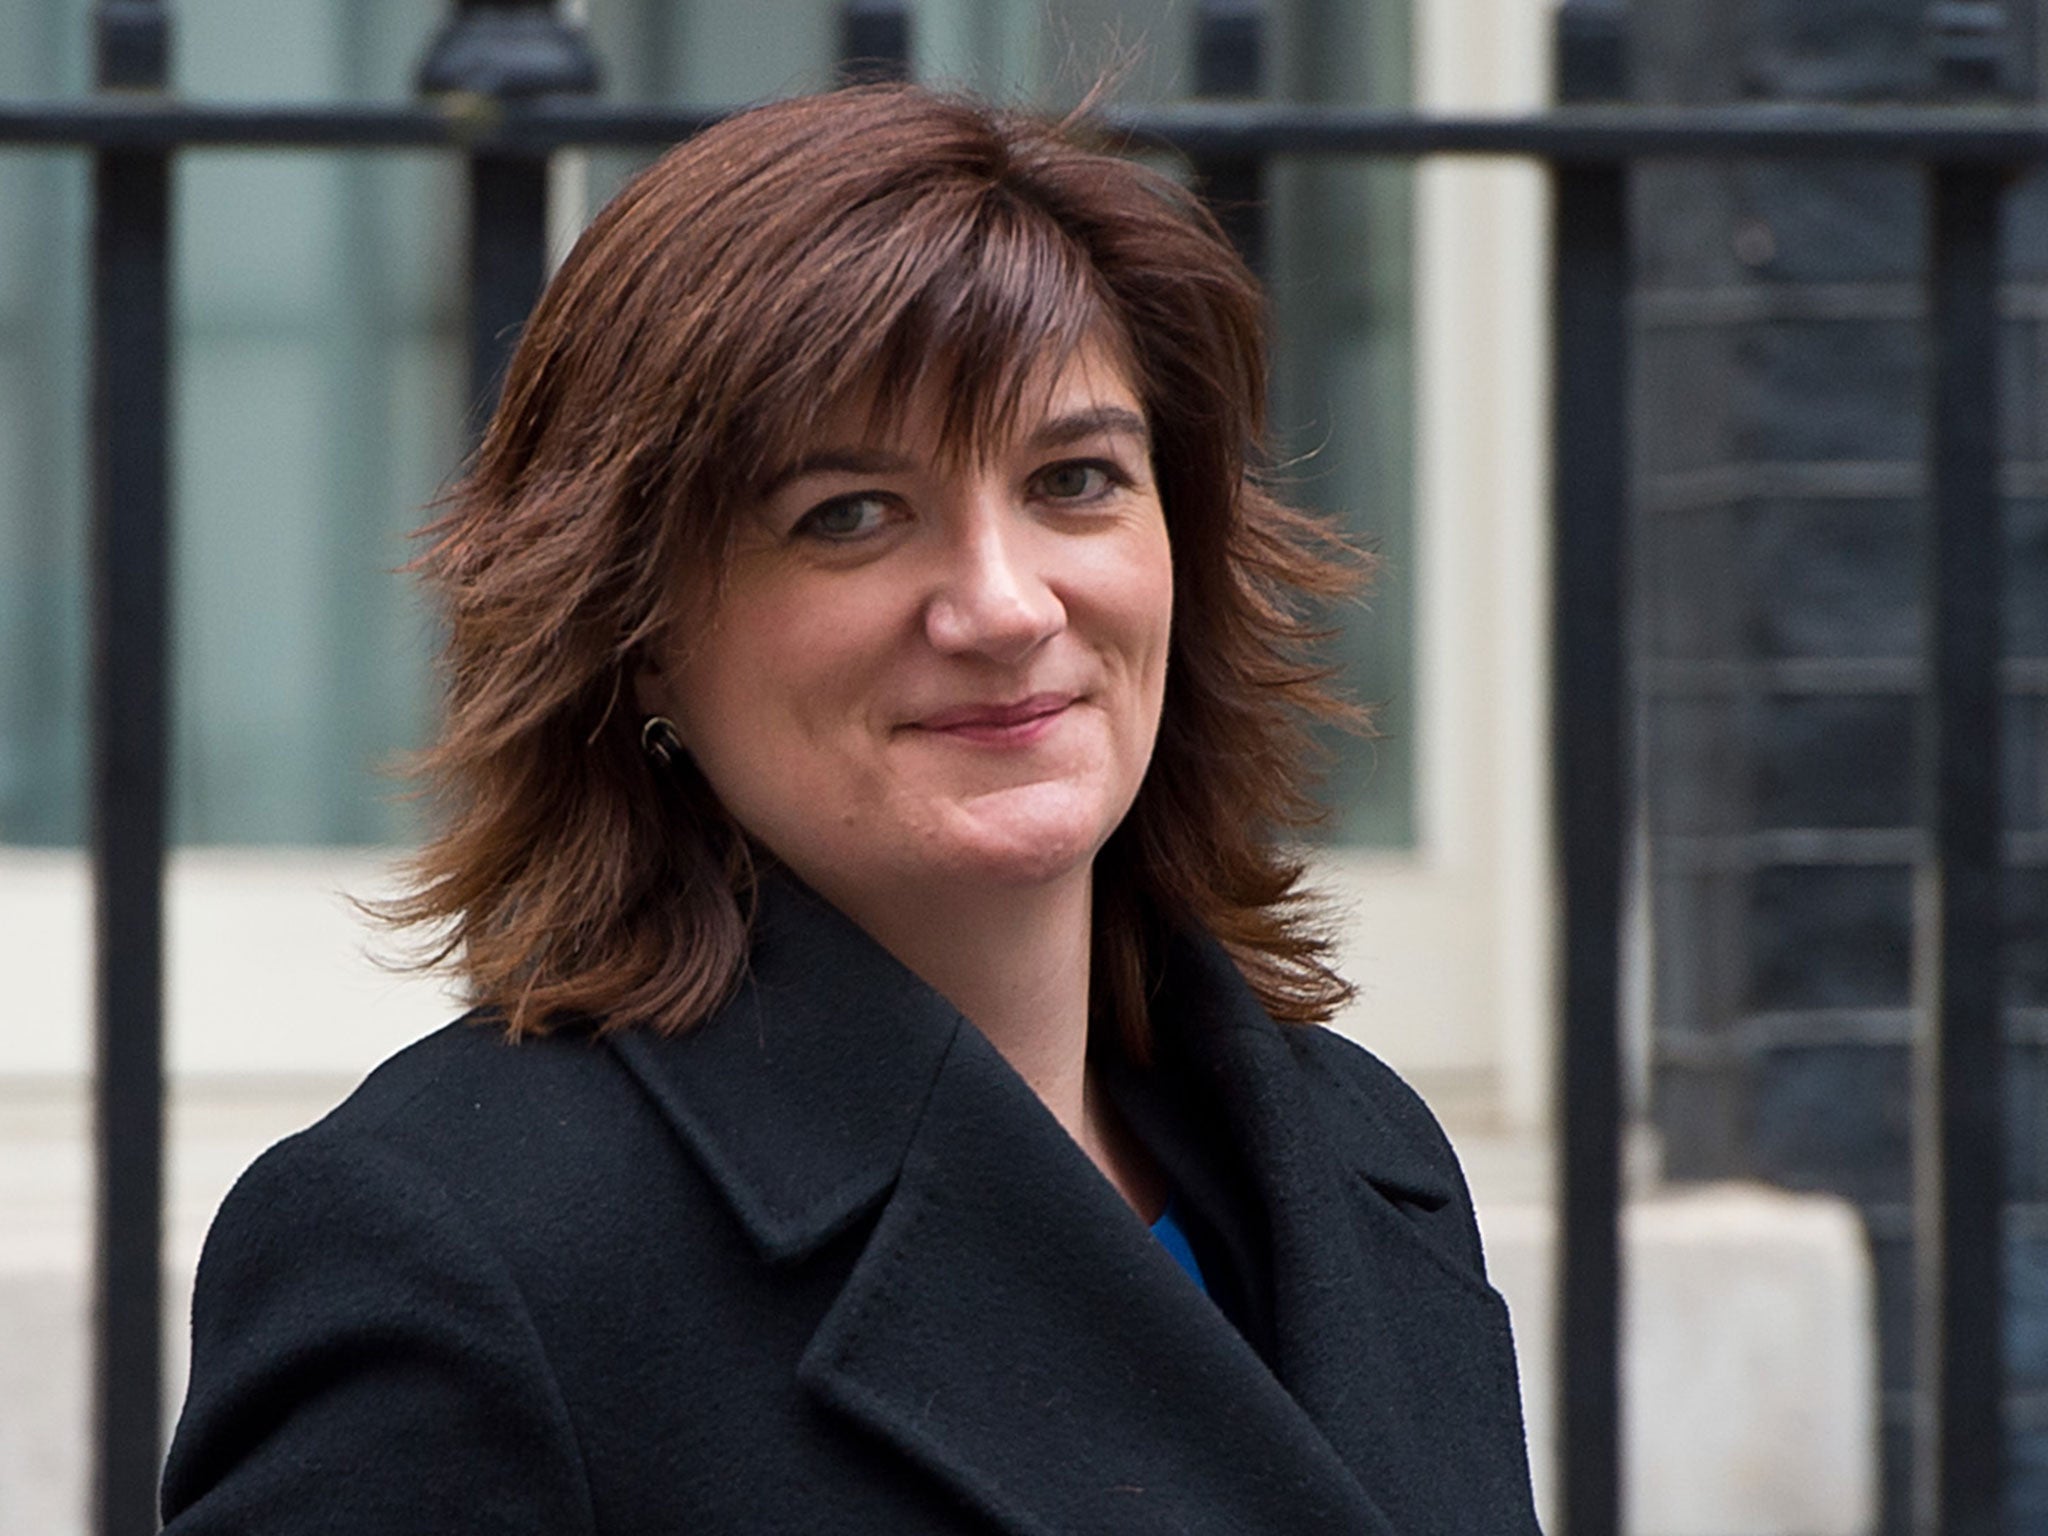 Former education secretary Baroness Nicky Morgan was “frustrated” at lack of funding for rebuilding ageing schools